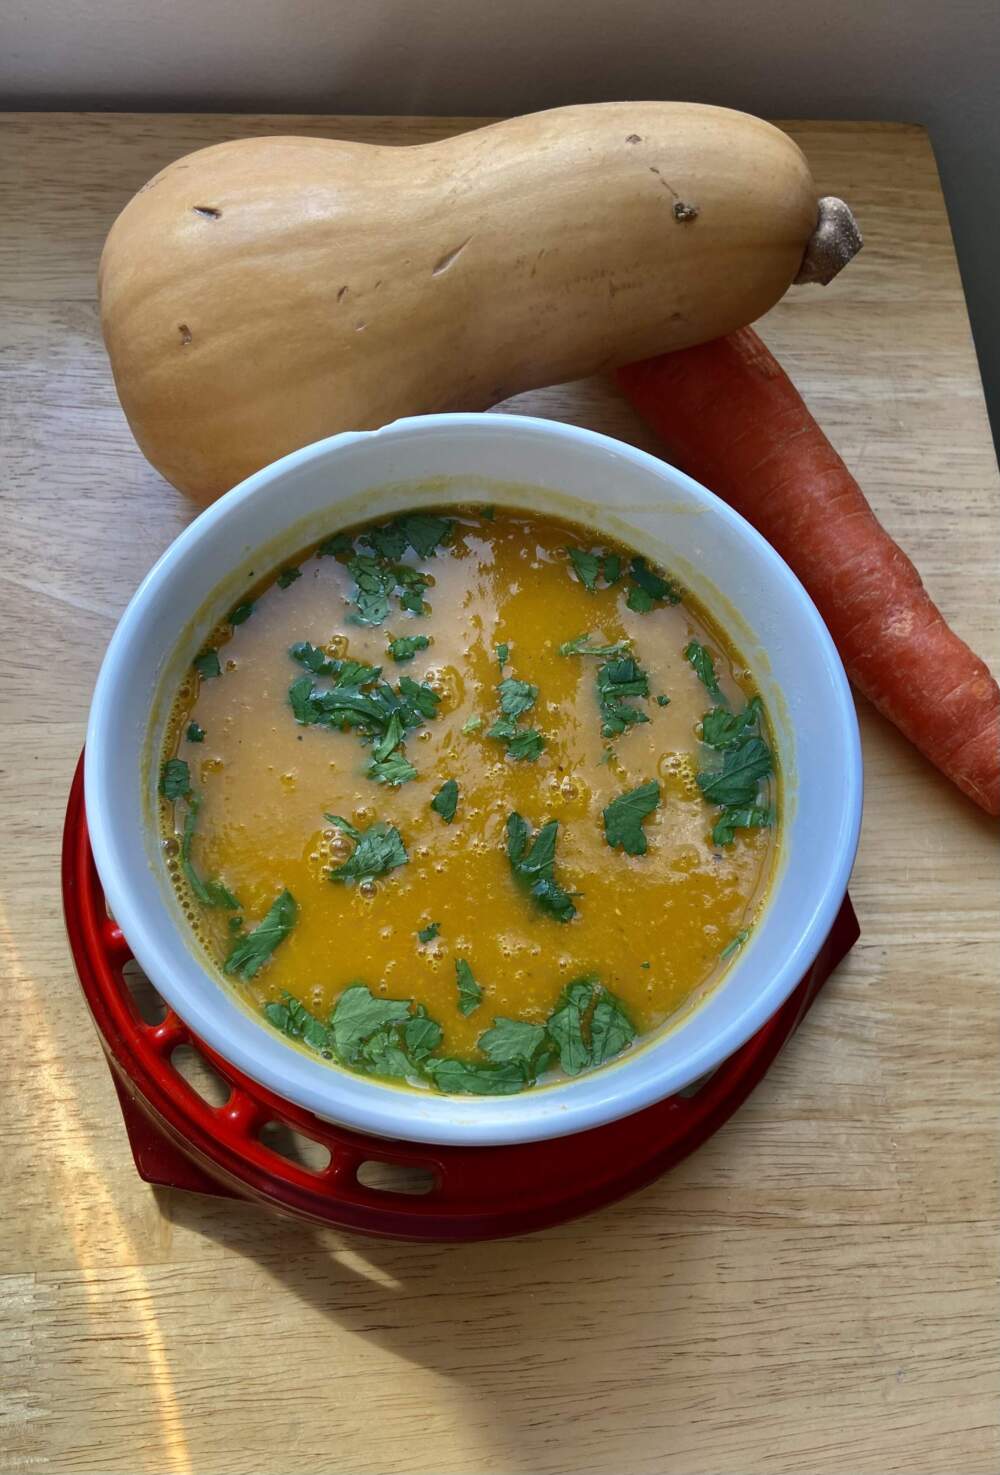 Roasted winter squash and carrot soup. (Kathy Gunst/Here & Now)